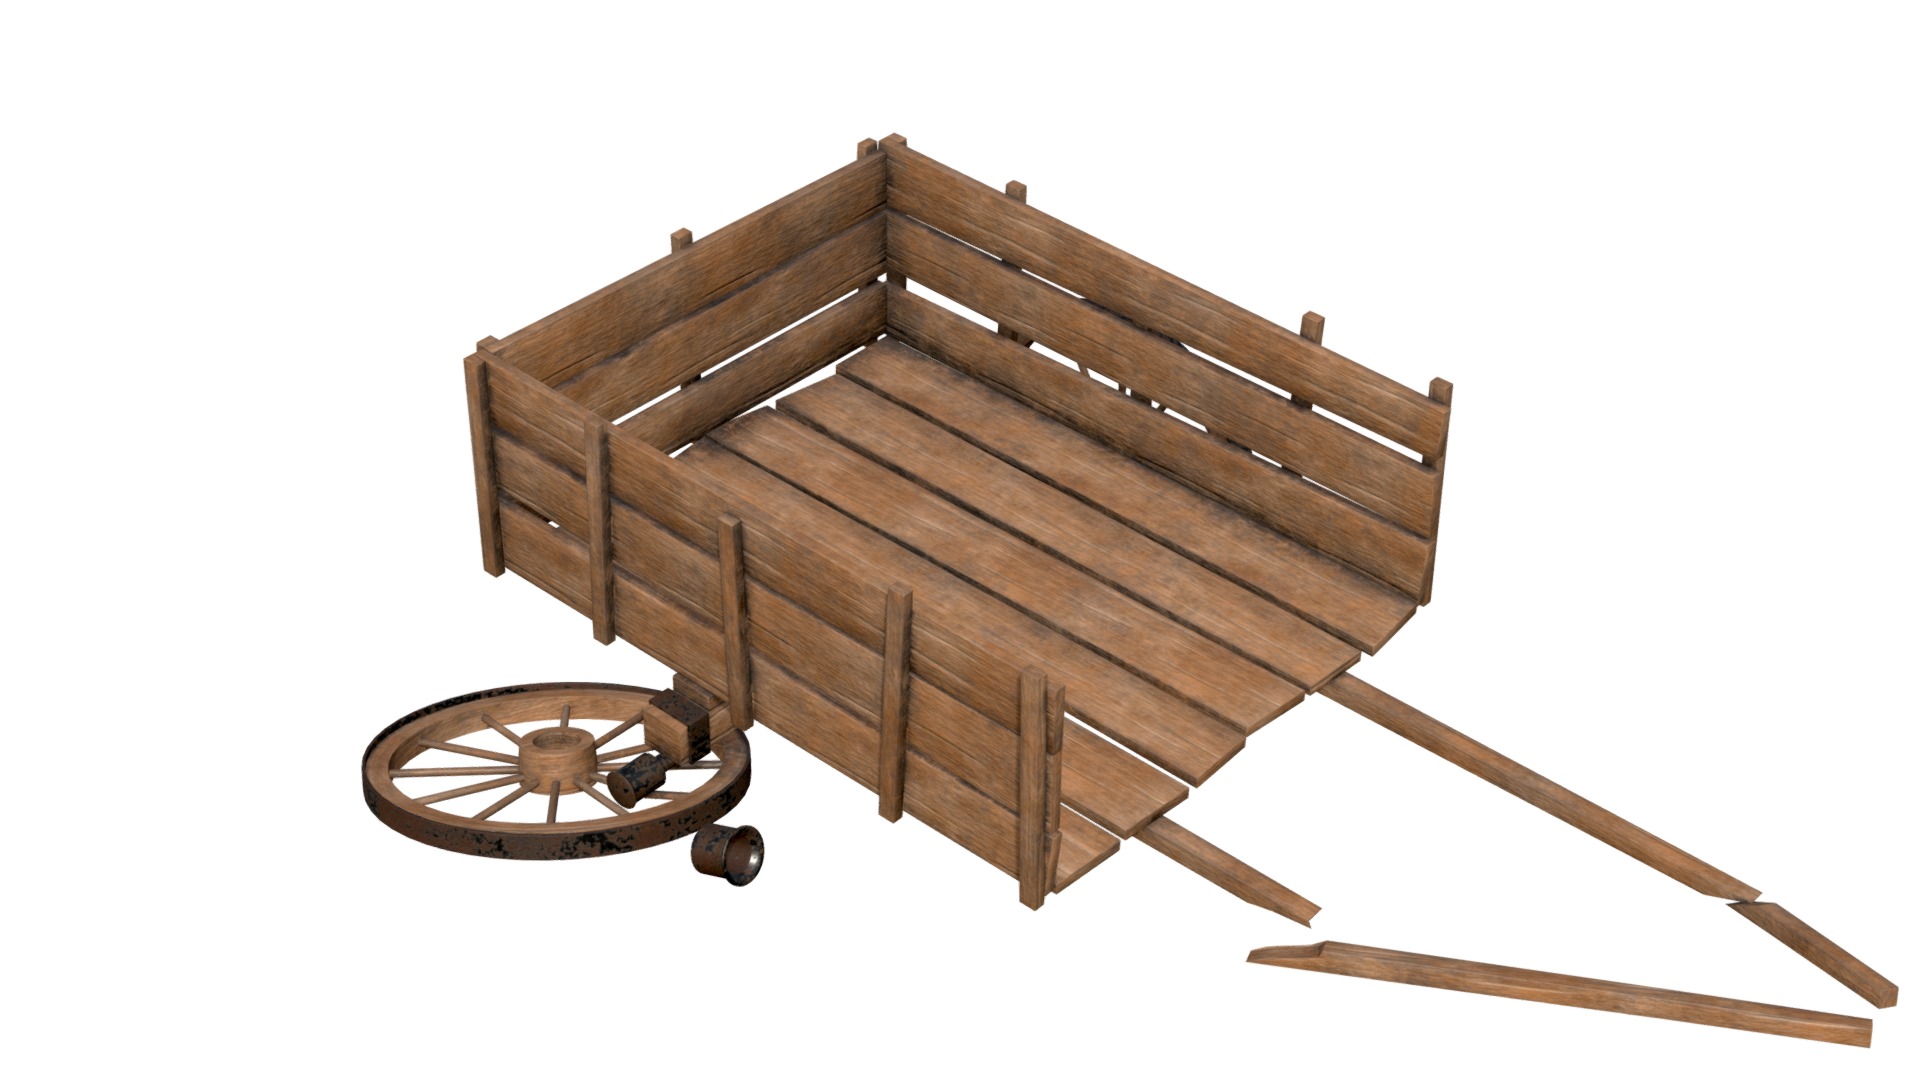 3D model Wooden cart broken - This is a 3D model of the Wooden cart broken. The 3D model is about a wooden table with a wheel.